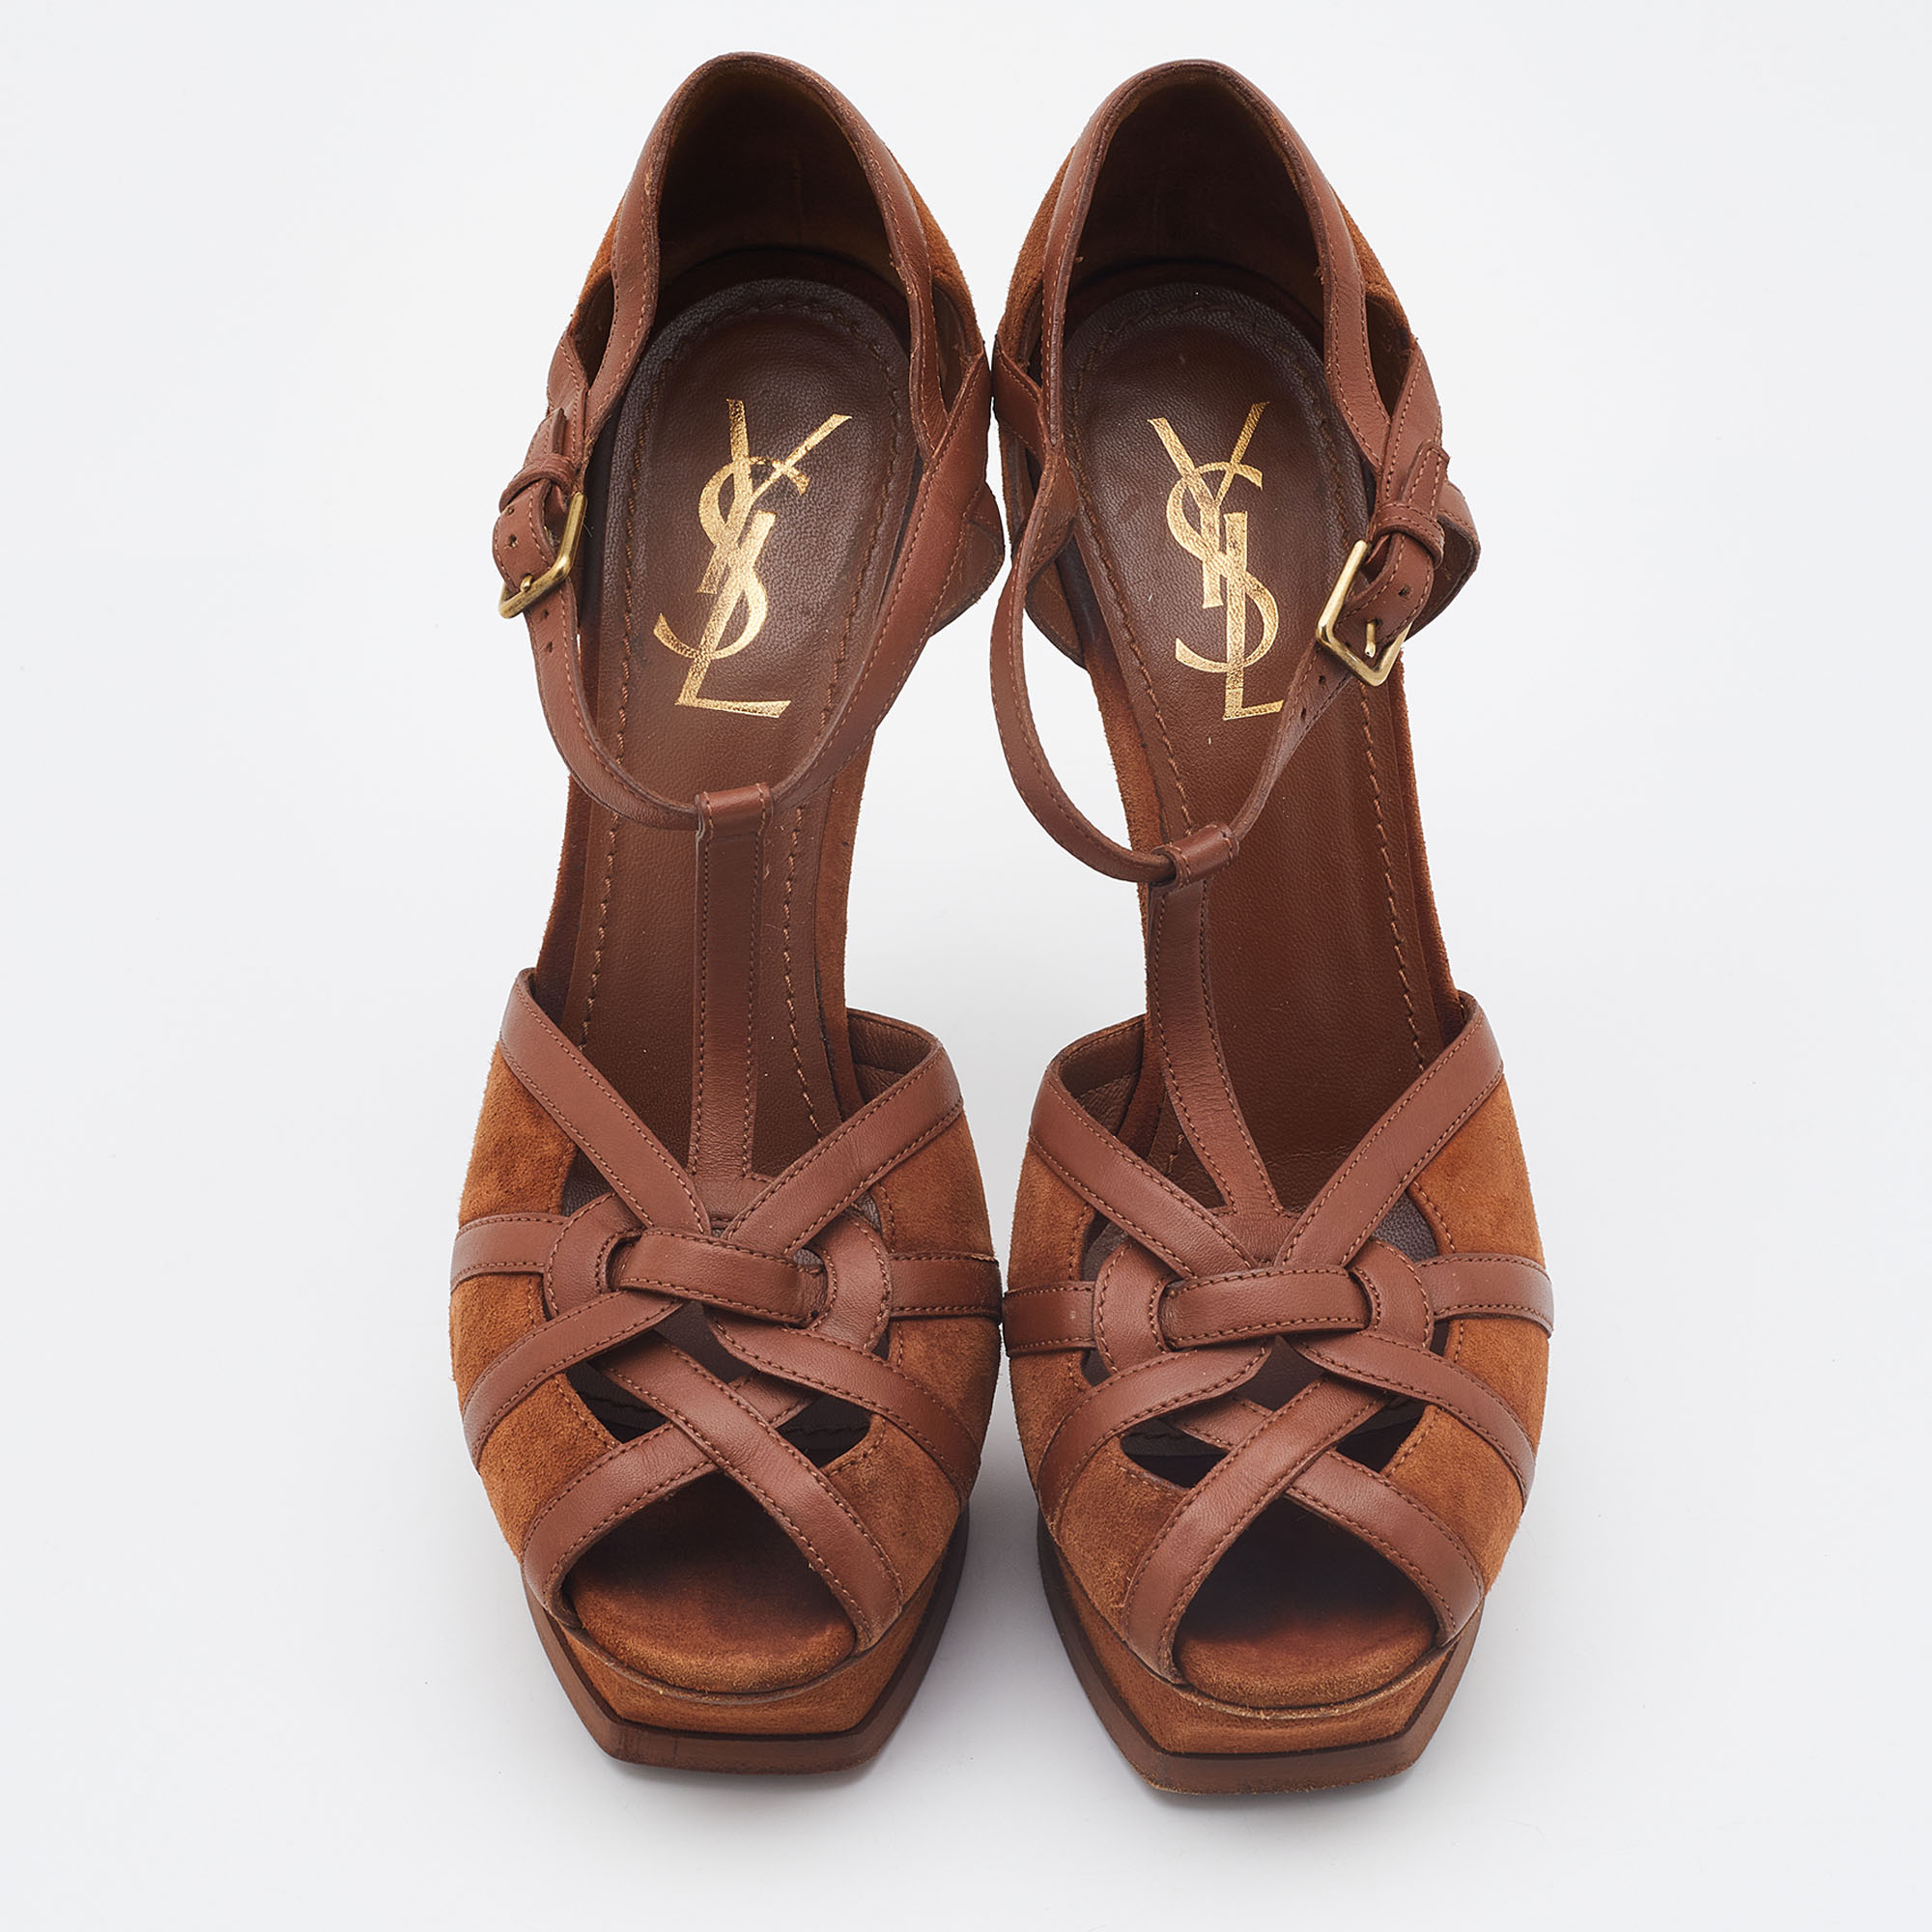 Yves Saint Laurent Brown Suede And Leather Tribute Sandals Size 38.5